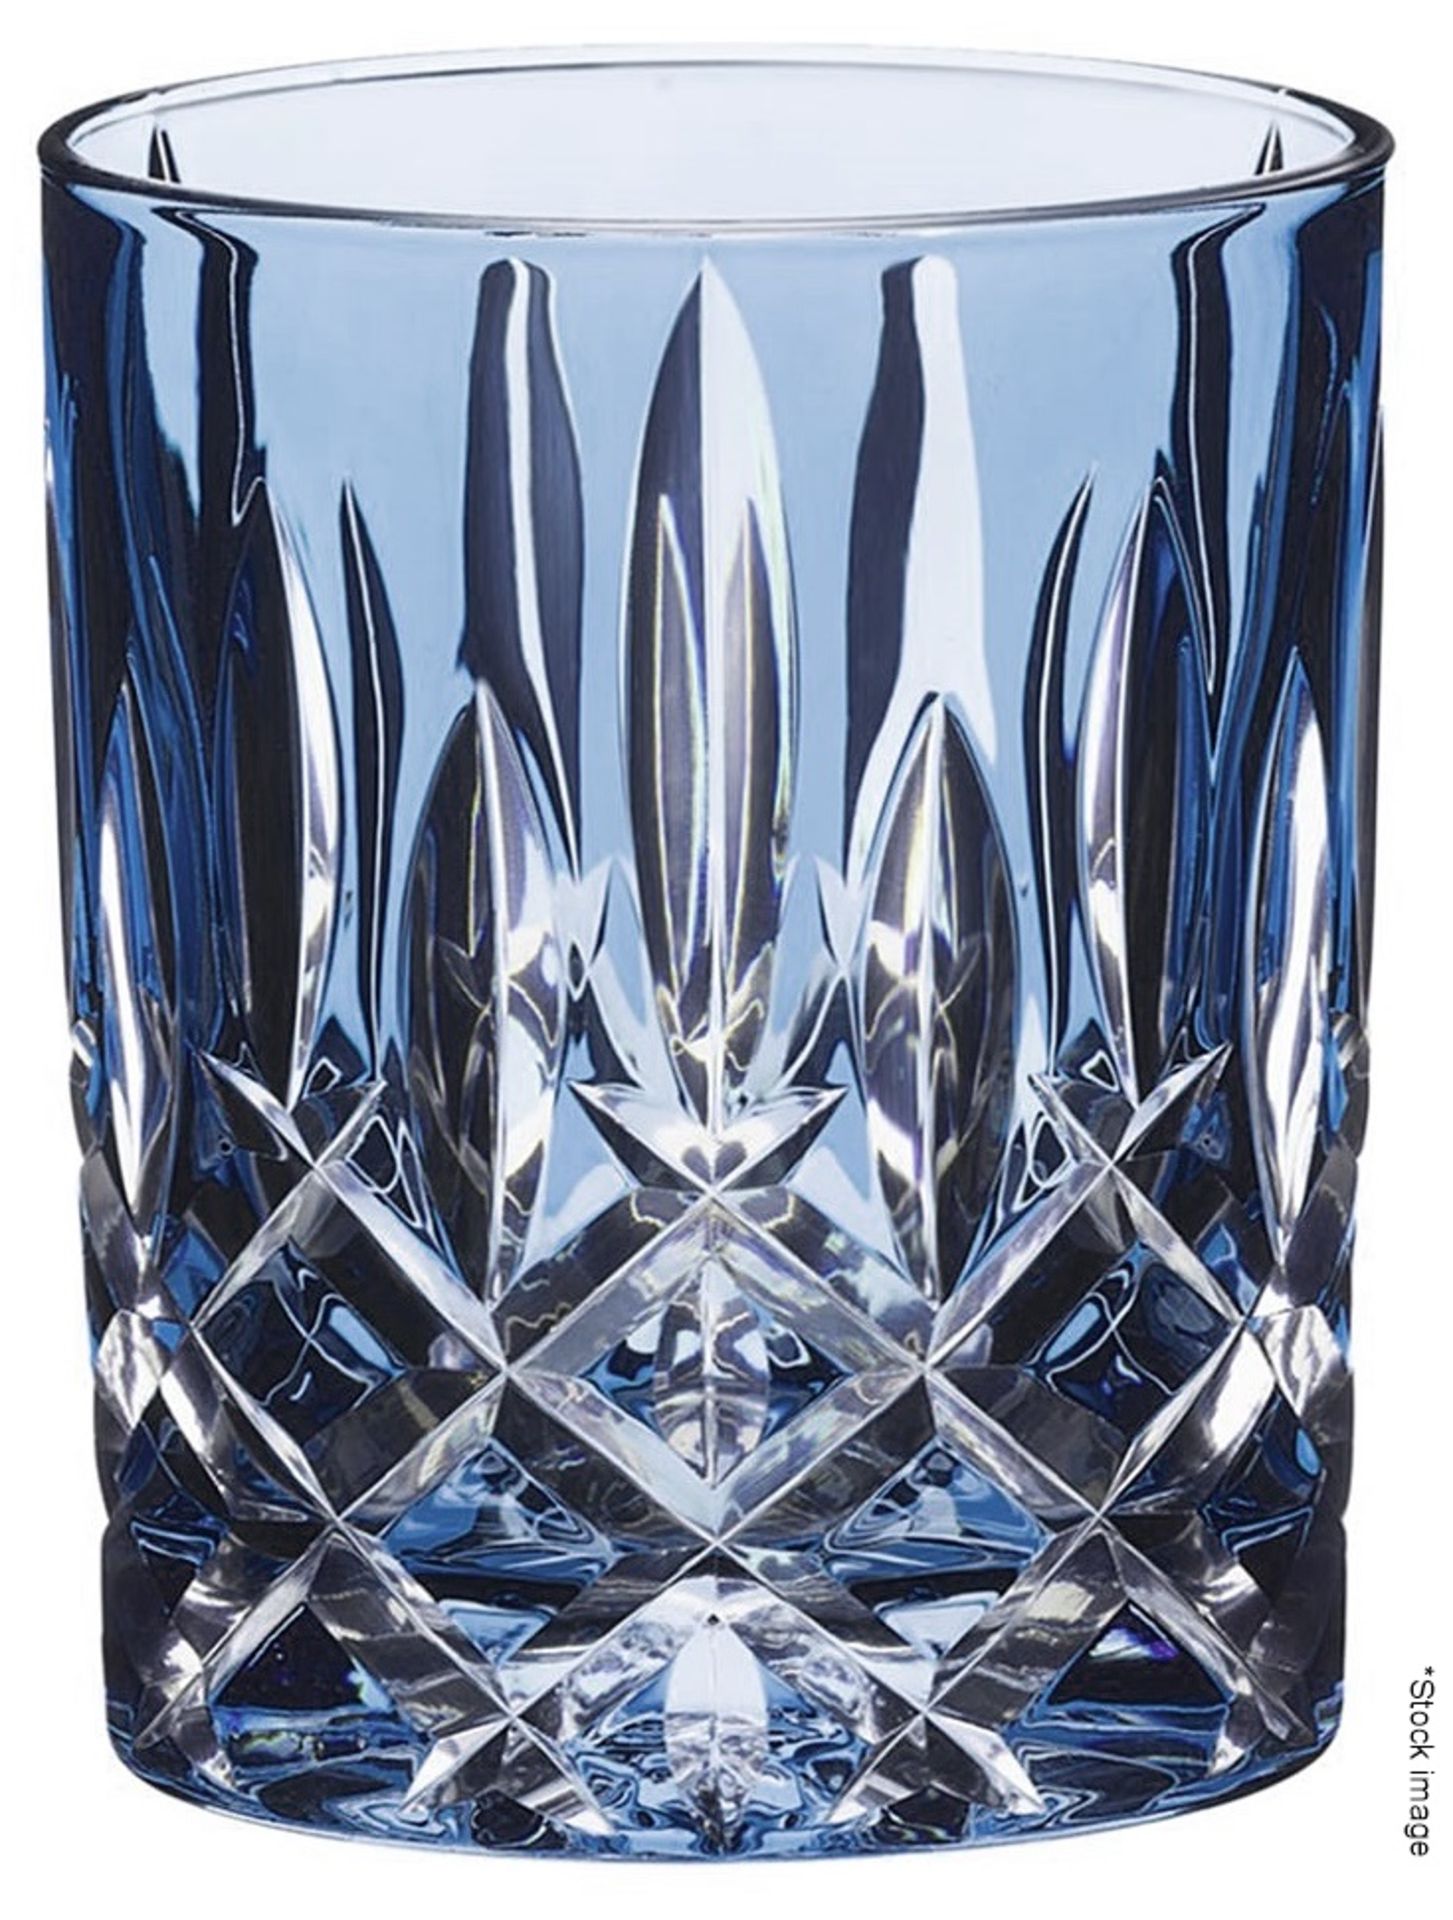 3 x RIEDEL 'Laudon' Luxury Crystal Whisky Glasses In Light Blue (295ml) - Total RRP £225.00 - Image 7 of 10